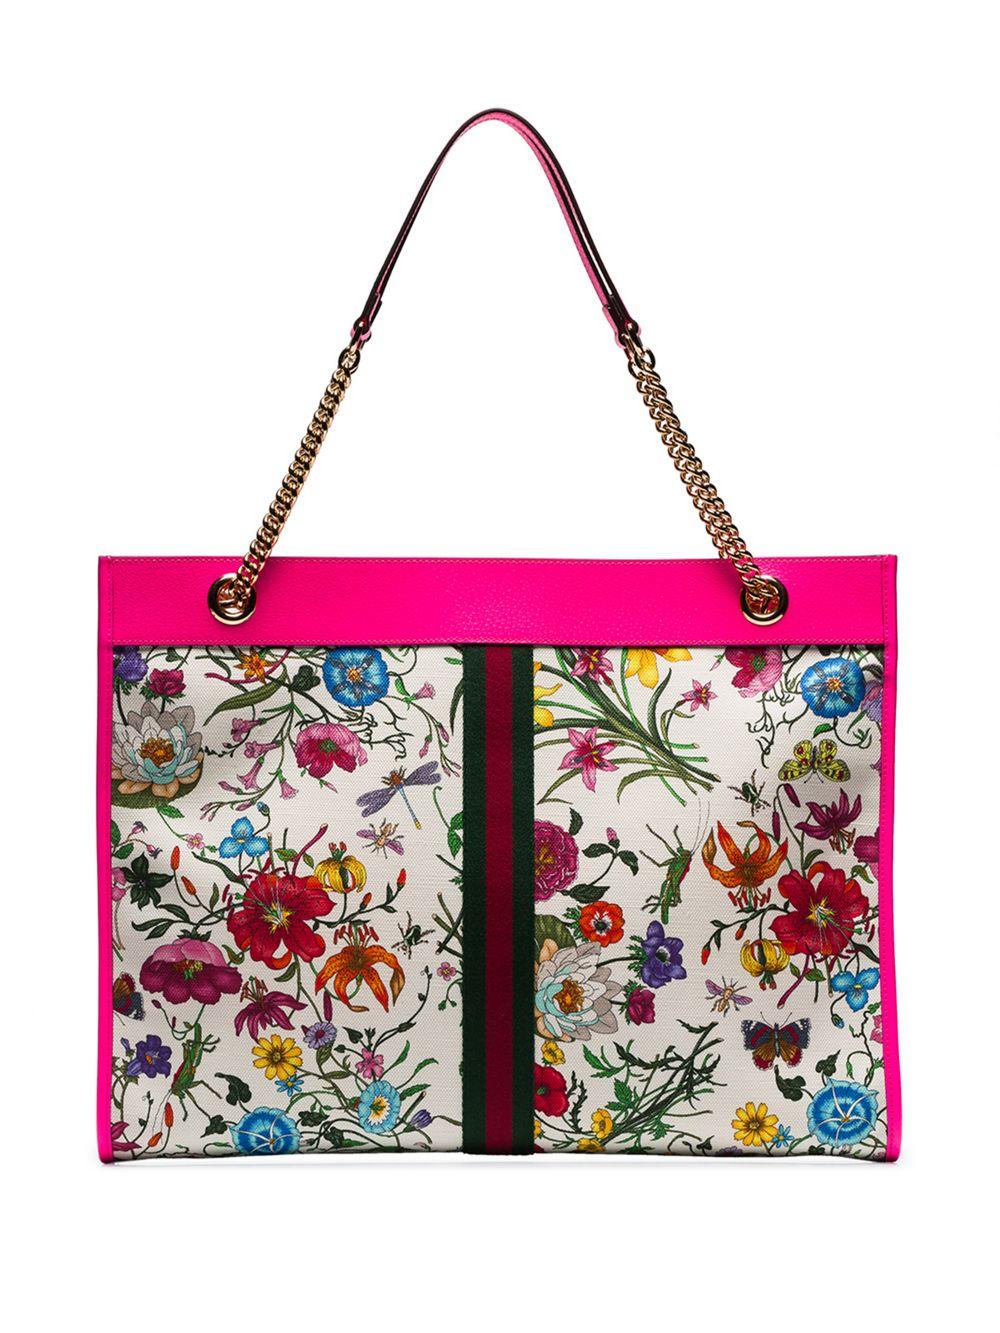 Gucci Canvas Multicoloured Large Floral Tote in Pink - Lyst